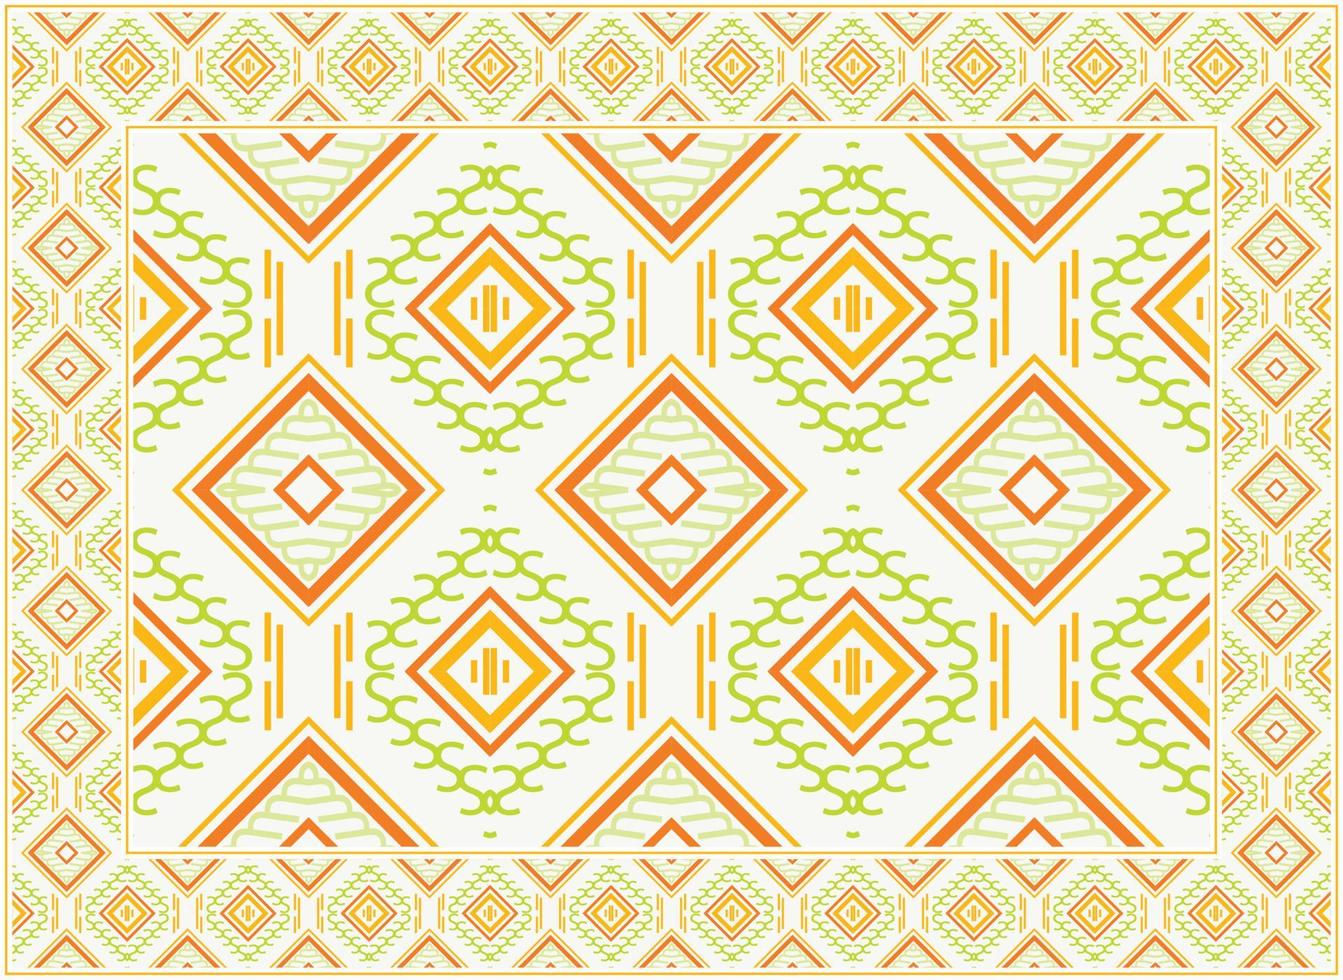 Carpet Persian rug modern living room, Motif Ethnic seamless Pattern modern Persian rug, African Ethnic Aztec style design for print fabric Carpets, towels, handkerchiefs, scarves rug, vector